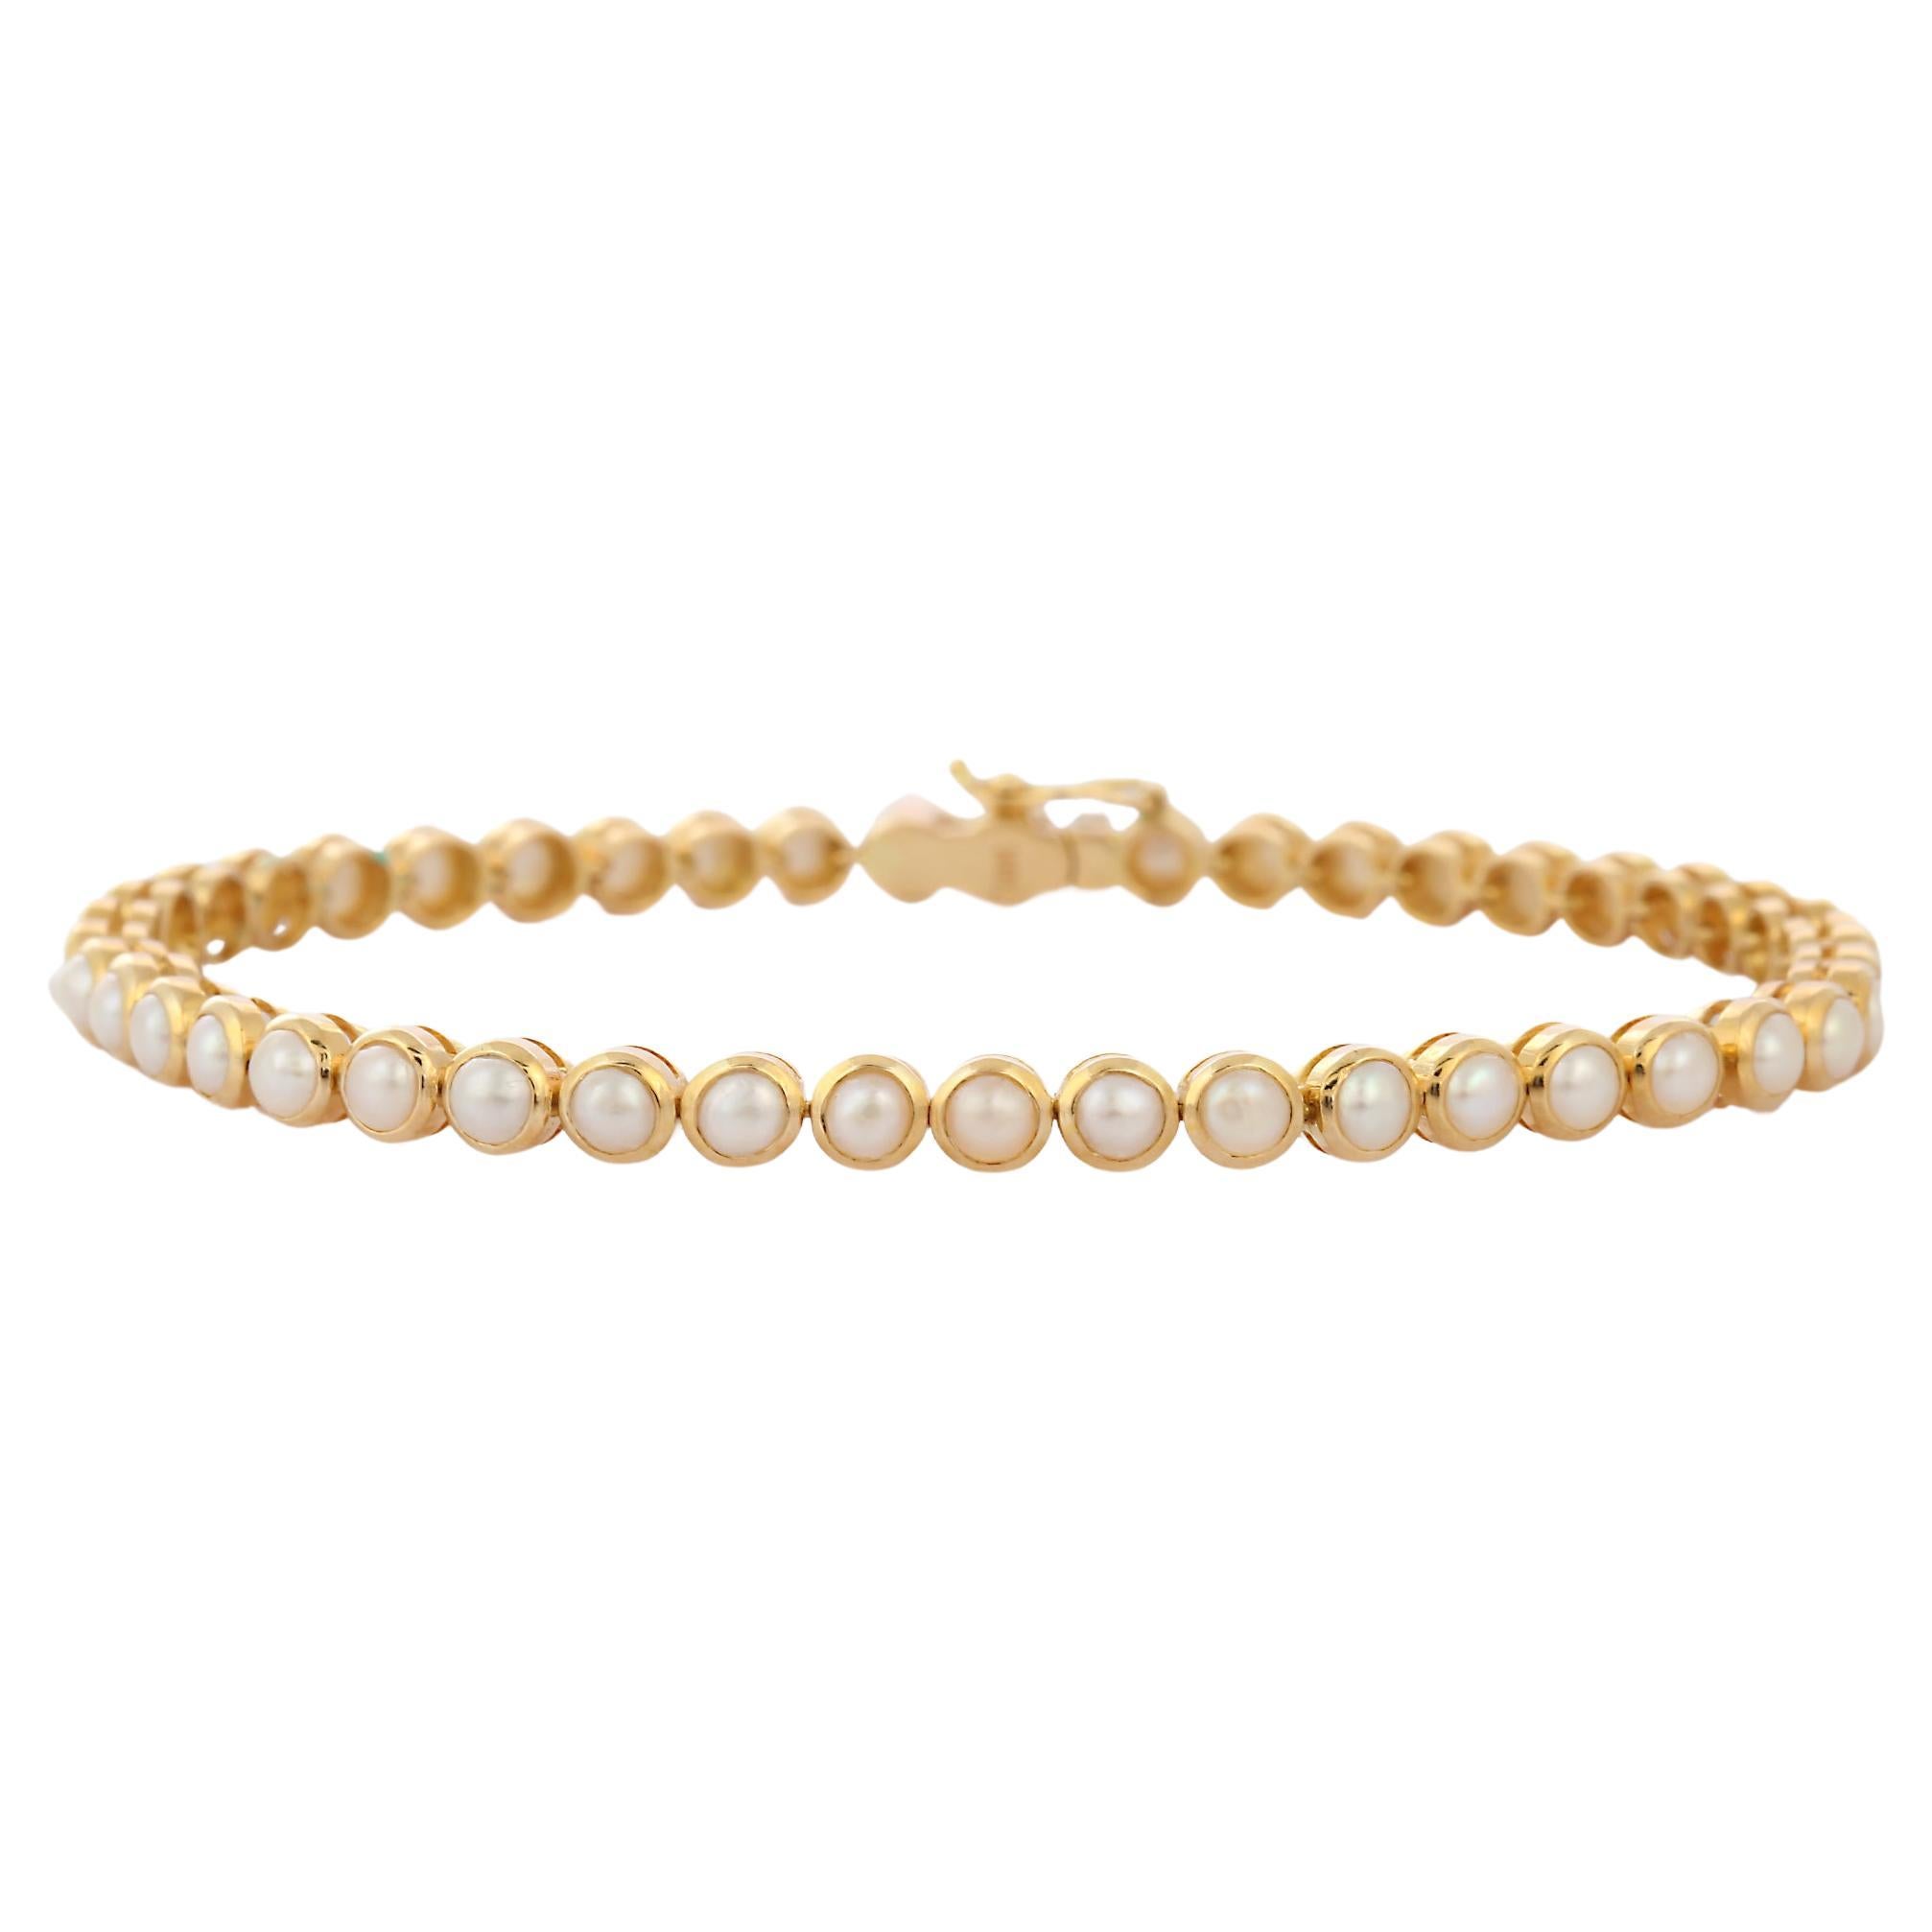 Statement 7.35 Ct Pearl Bracelet in 18 Karat Yellow Gold For Sale